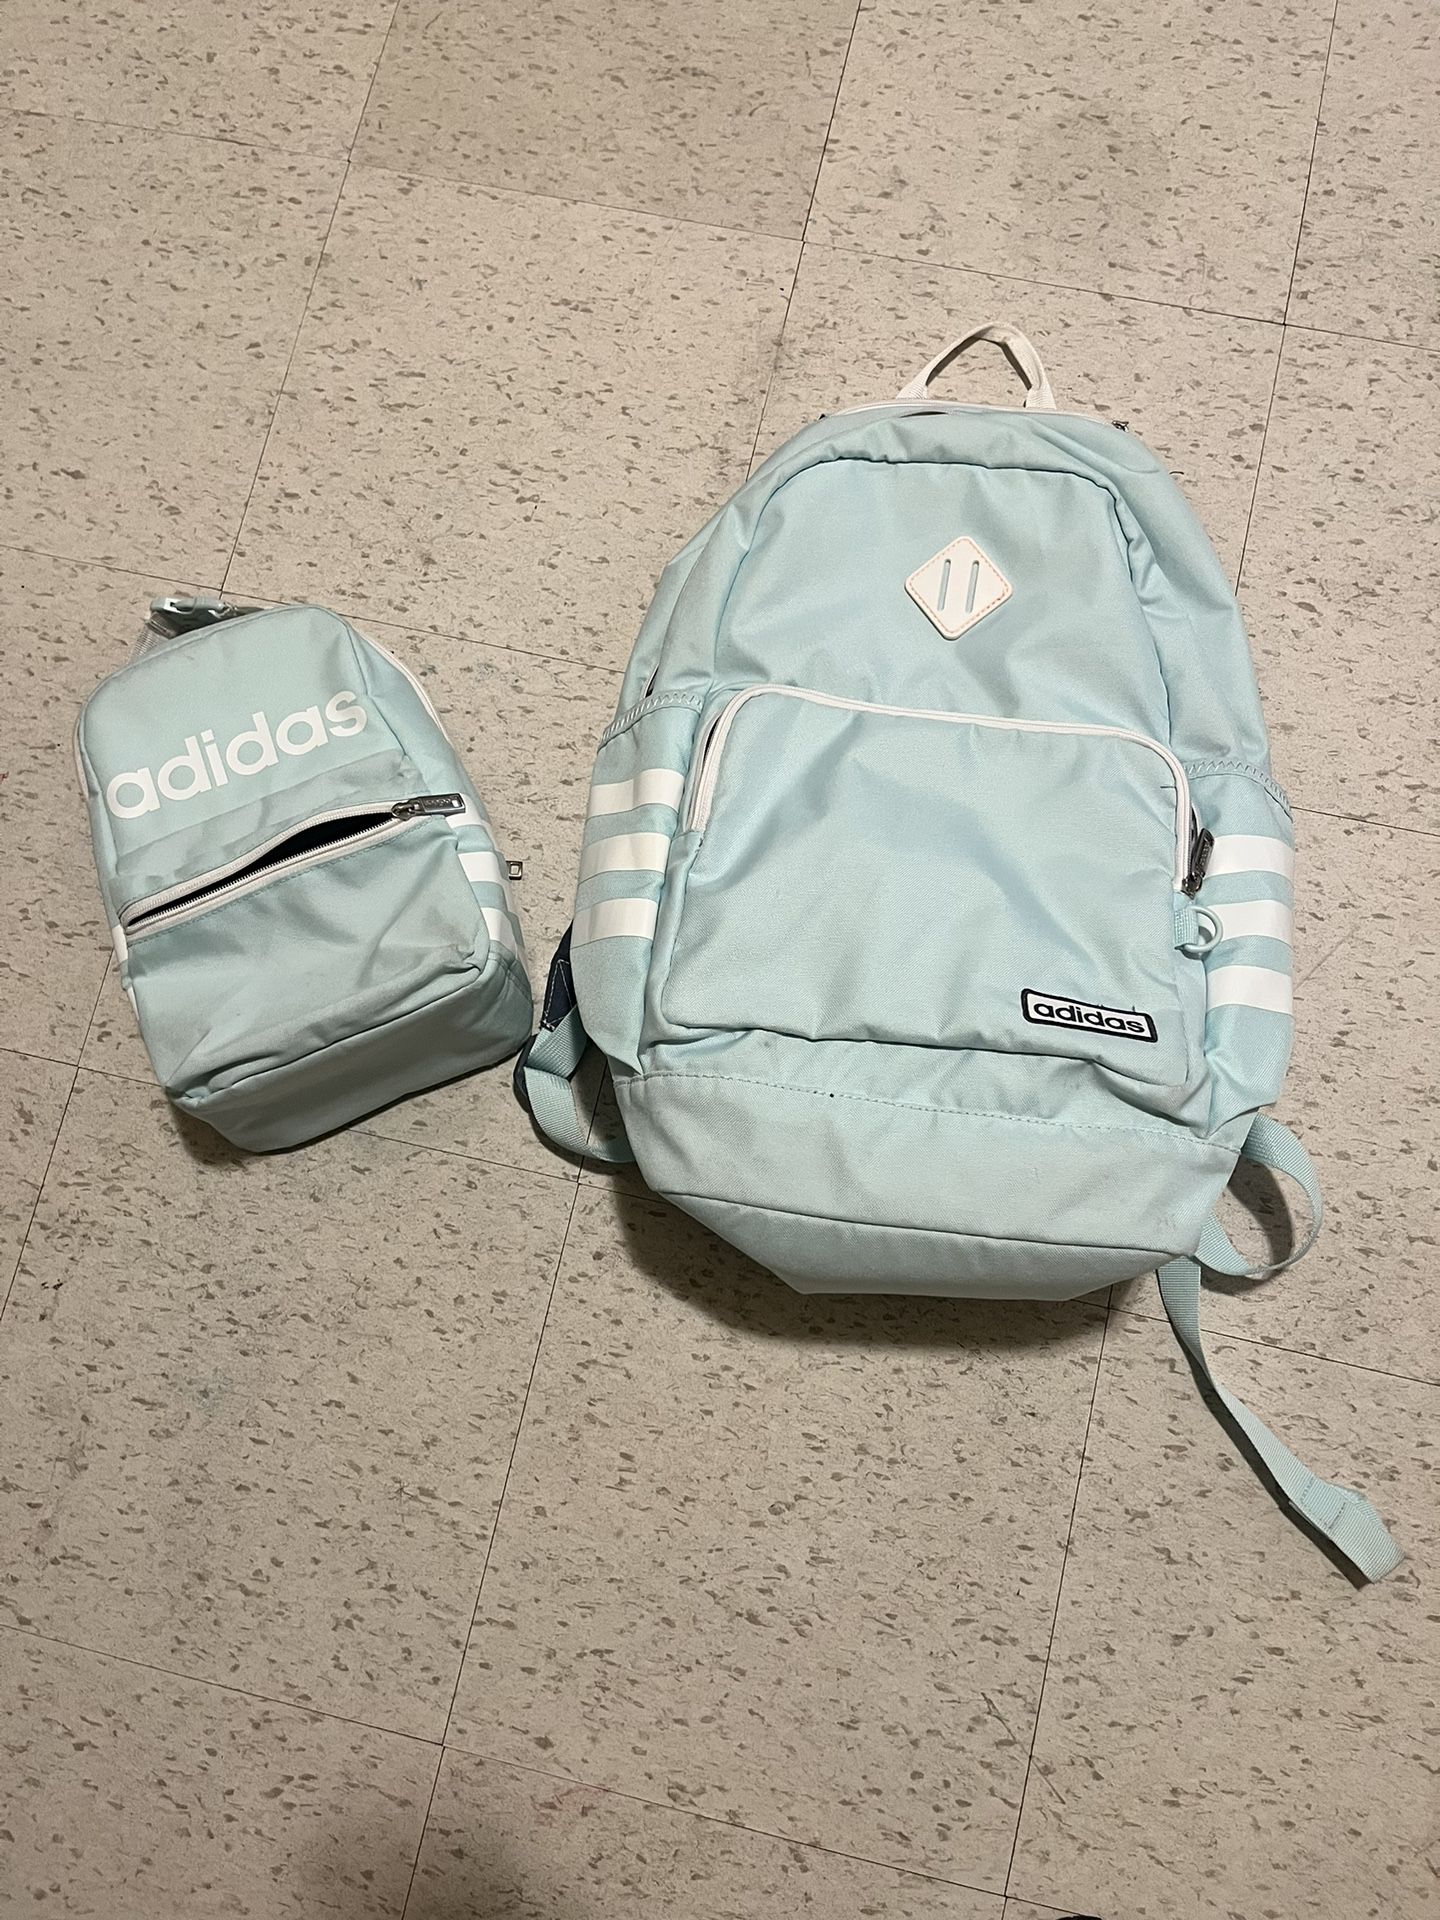 betaling Jurassic Park Blanco ADIDAS backpack And Lunch Bag for Sale in Stockton, CA - OfferUp